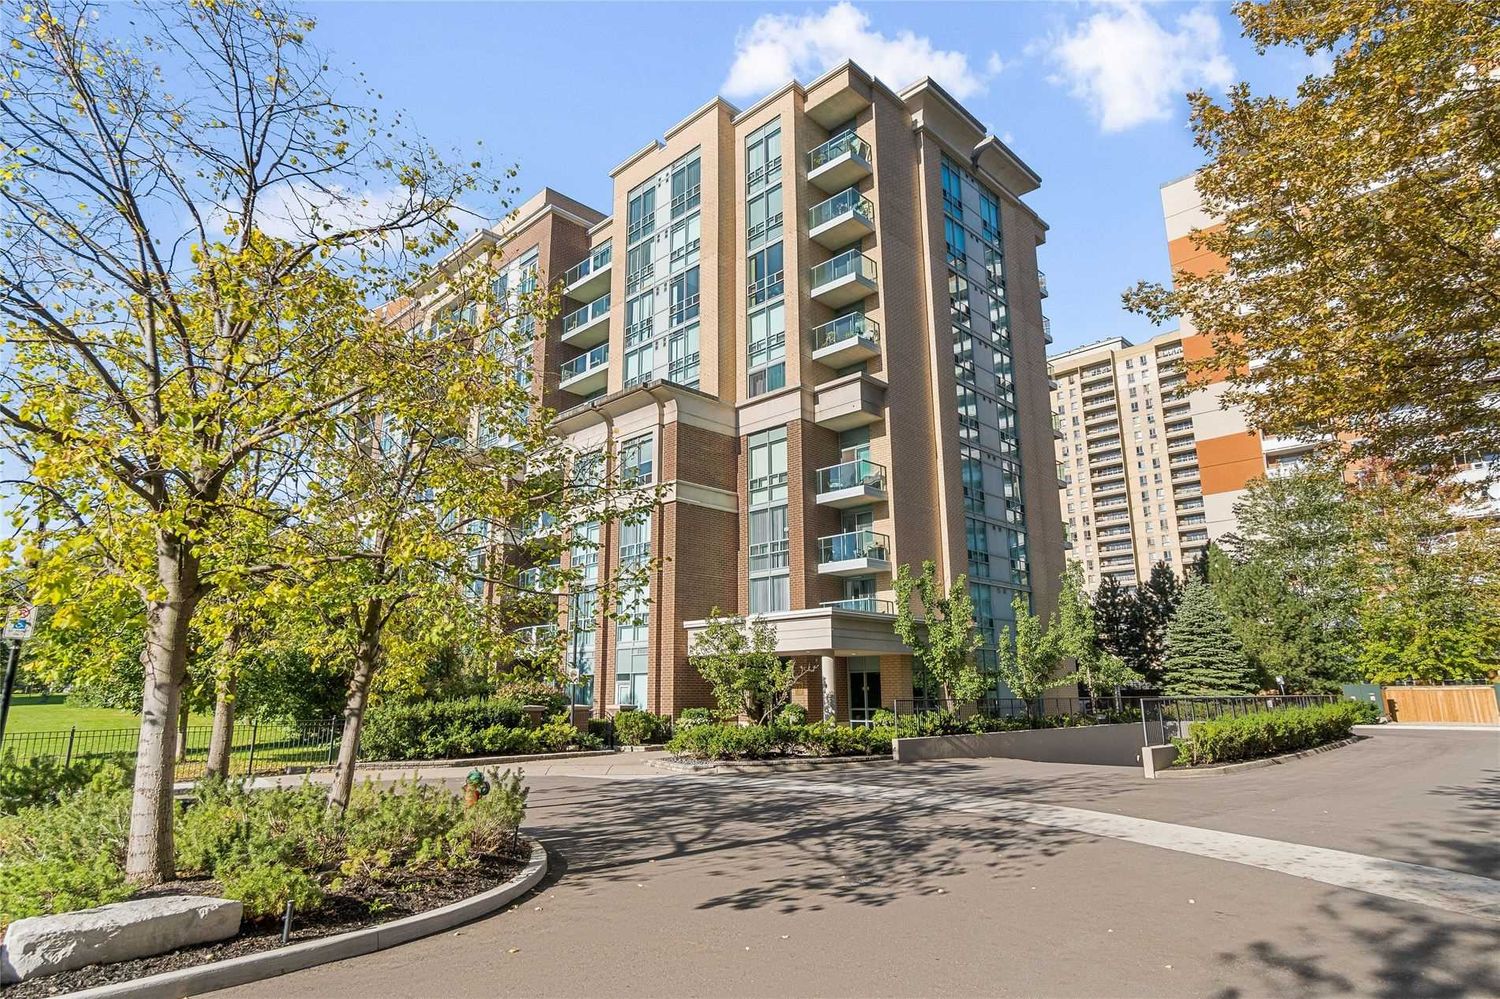 17 Michael Power Place. Port Royal Place I Condos is located in  Etobicoke, Toronto - image #2 of 3